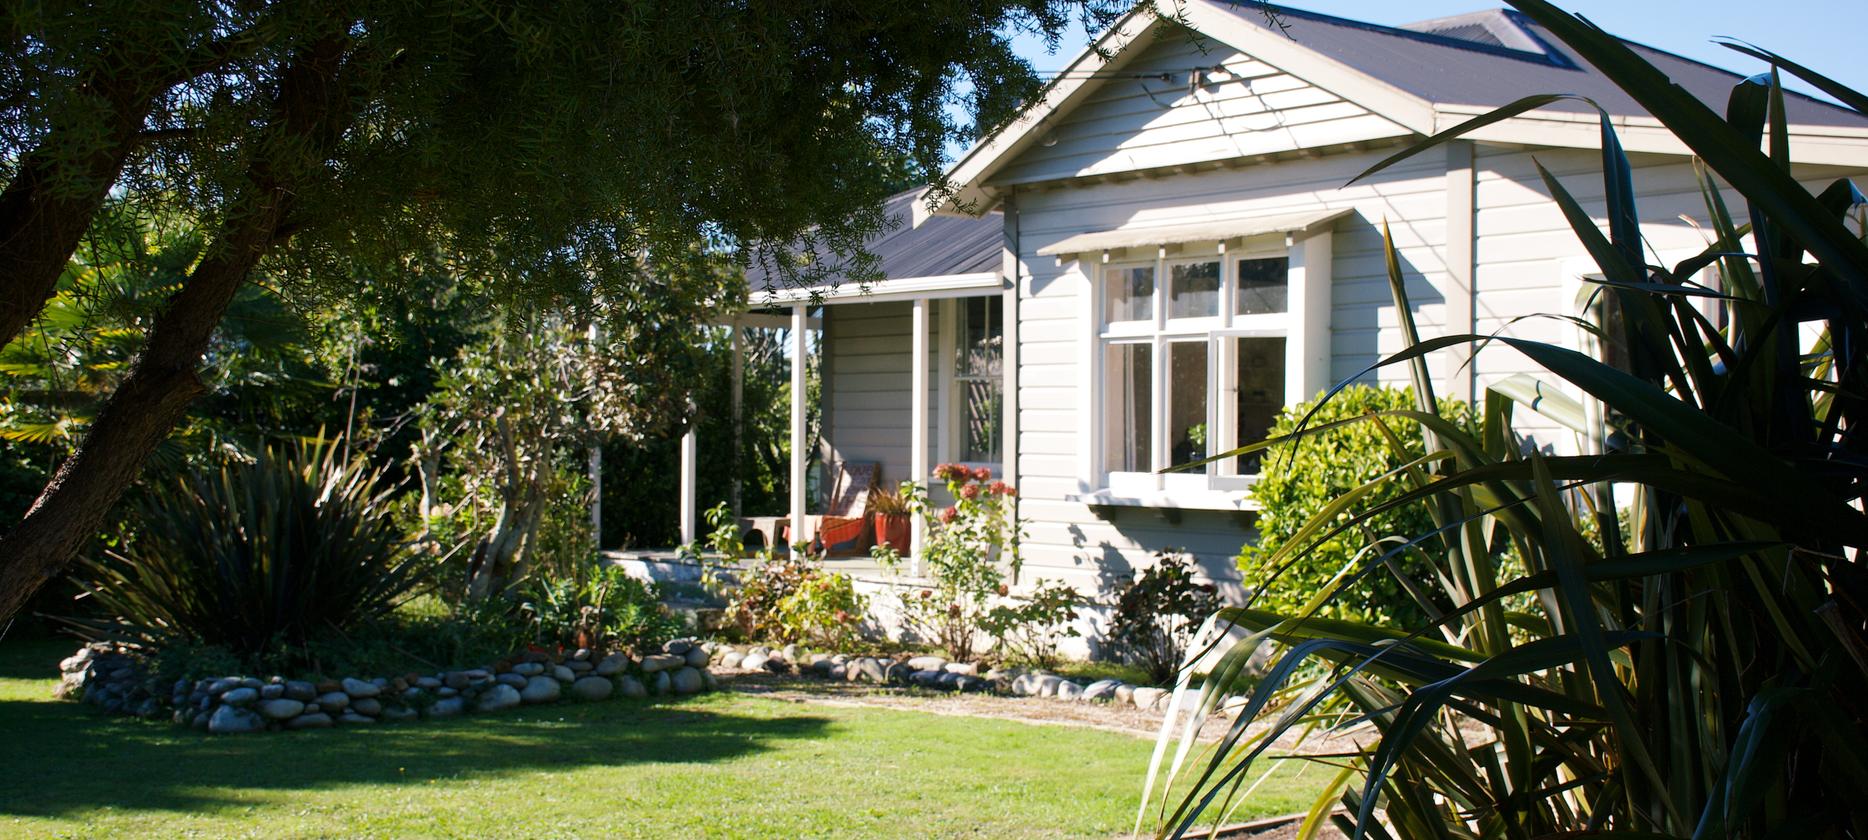 New Zealand property values up by almost 300% since 2003